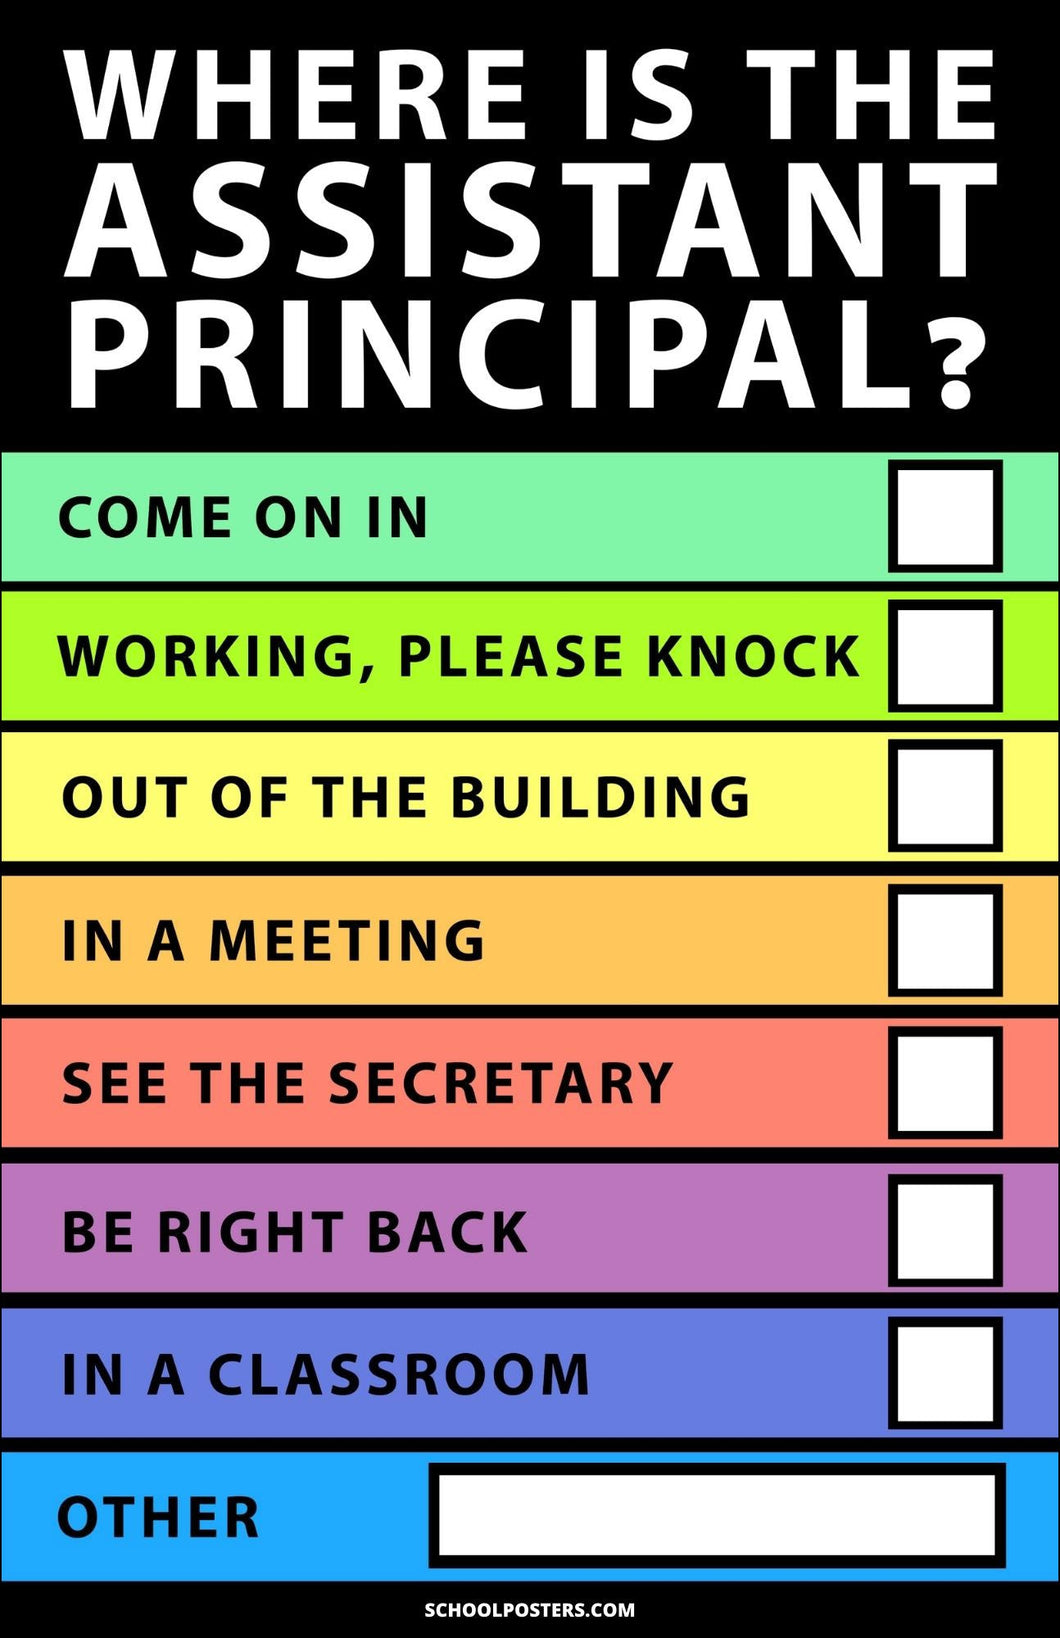 Where Is The Assistant Principal? Poster